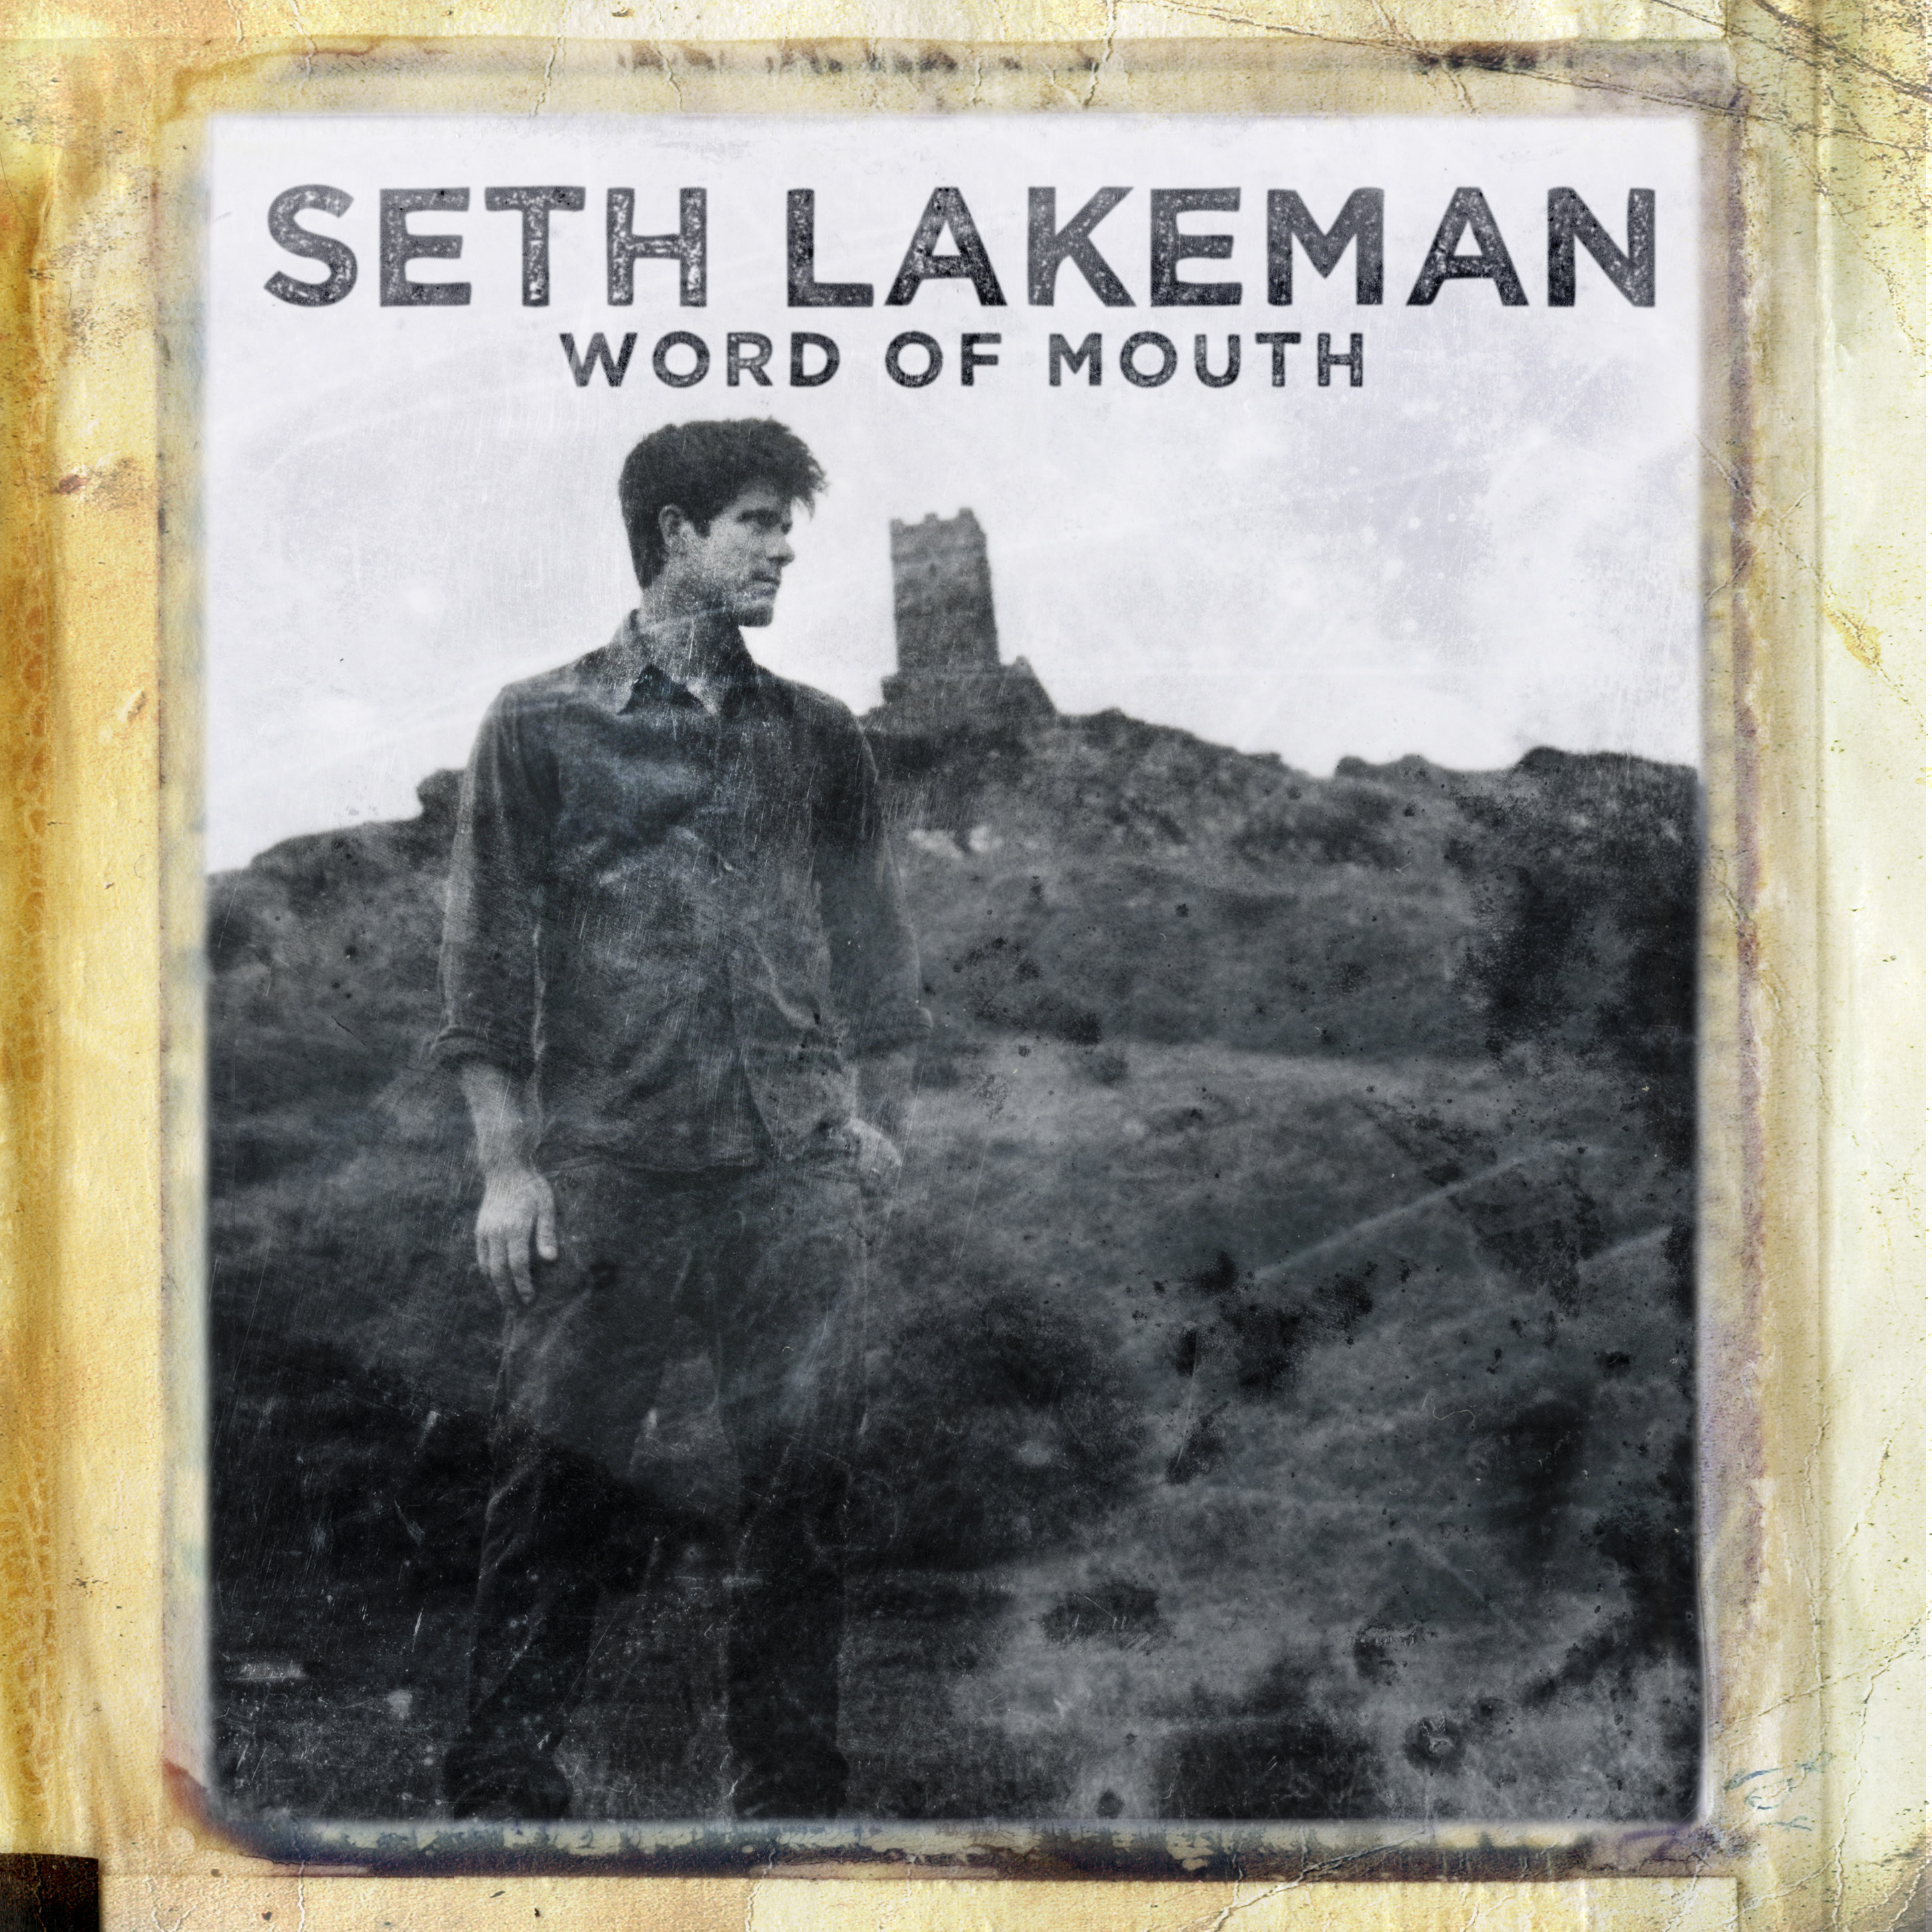 Seth Lakeman - Word Of Mouth (Deluxe CD bookpack) - 2xCD+BOOK